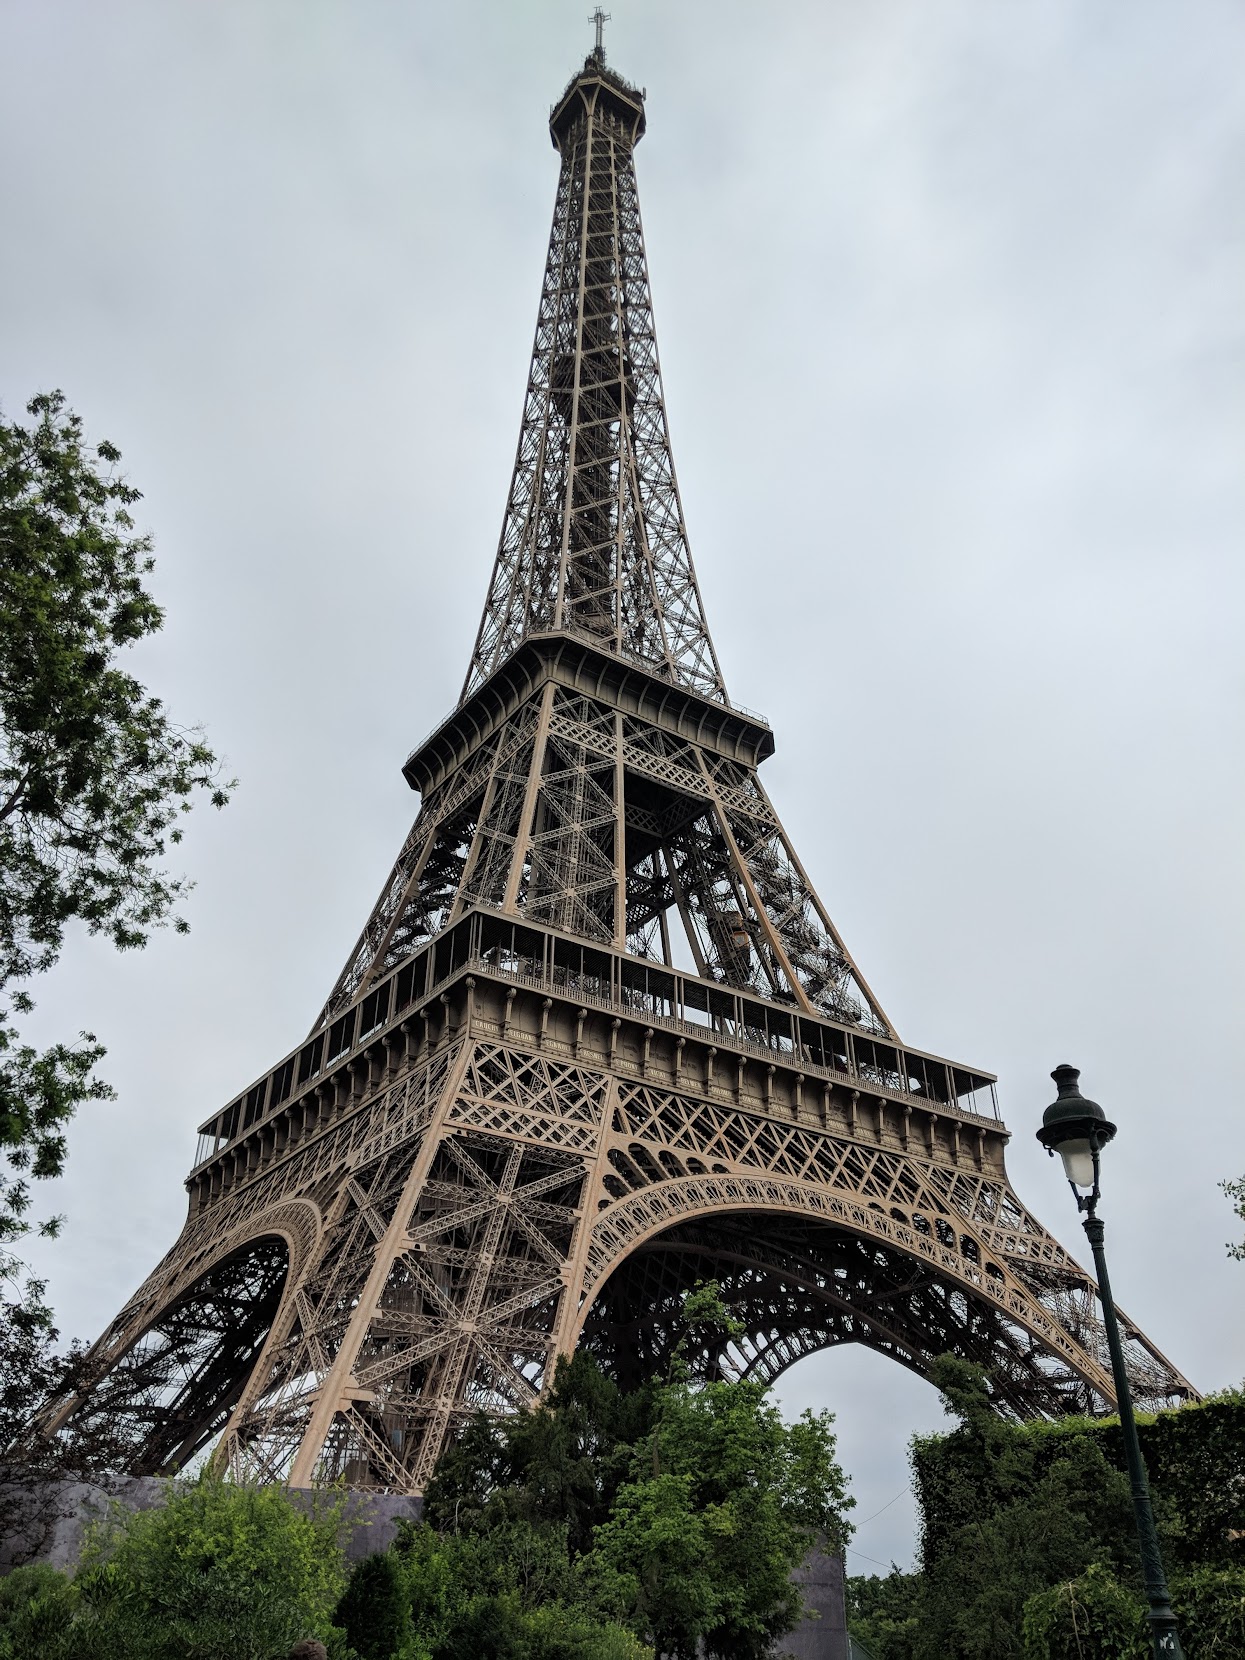 Snapshot of the Eiffel Tower in Paris, France